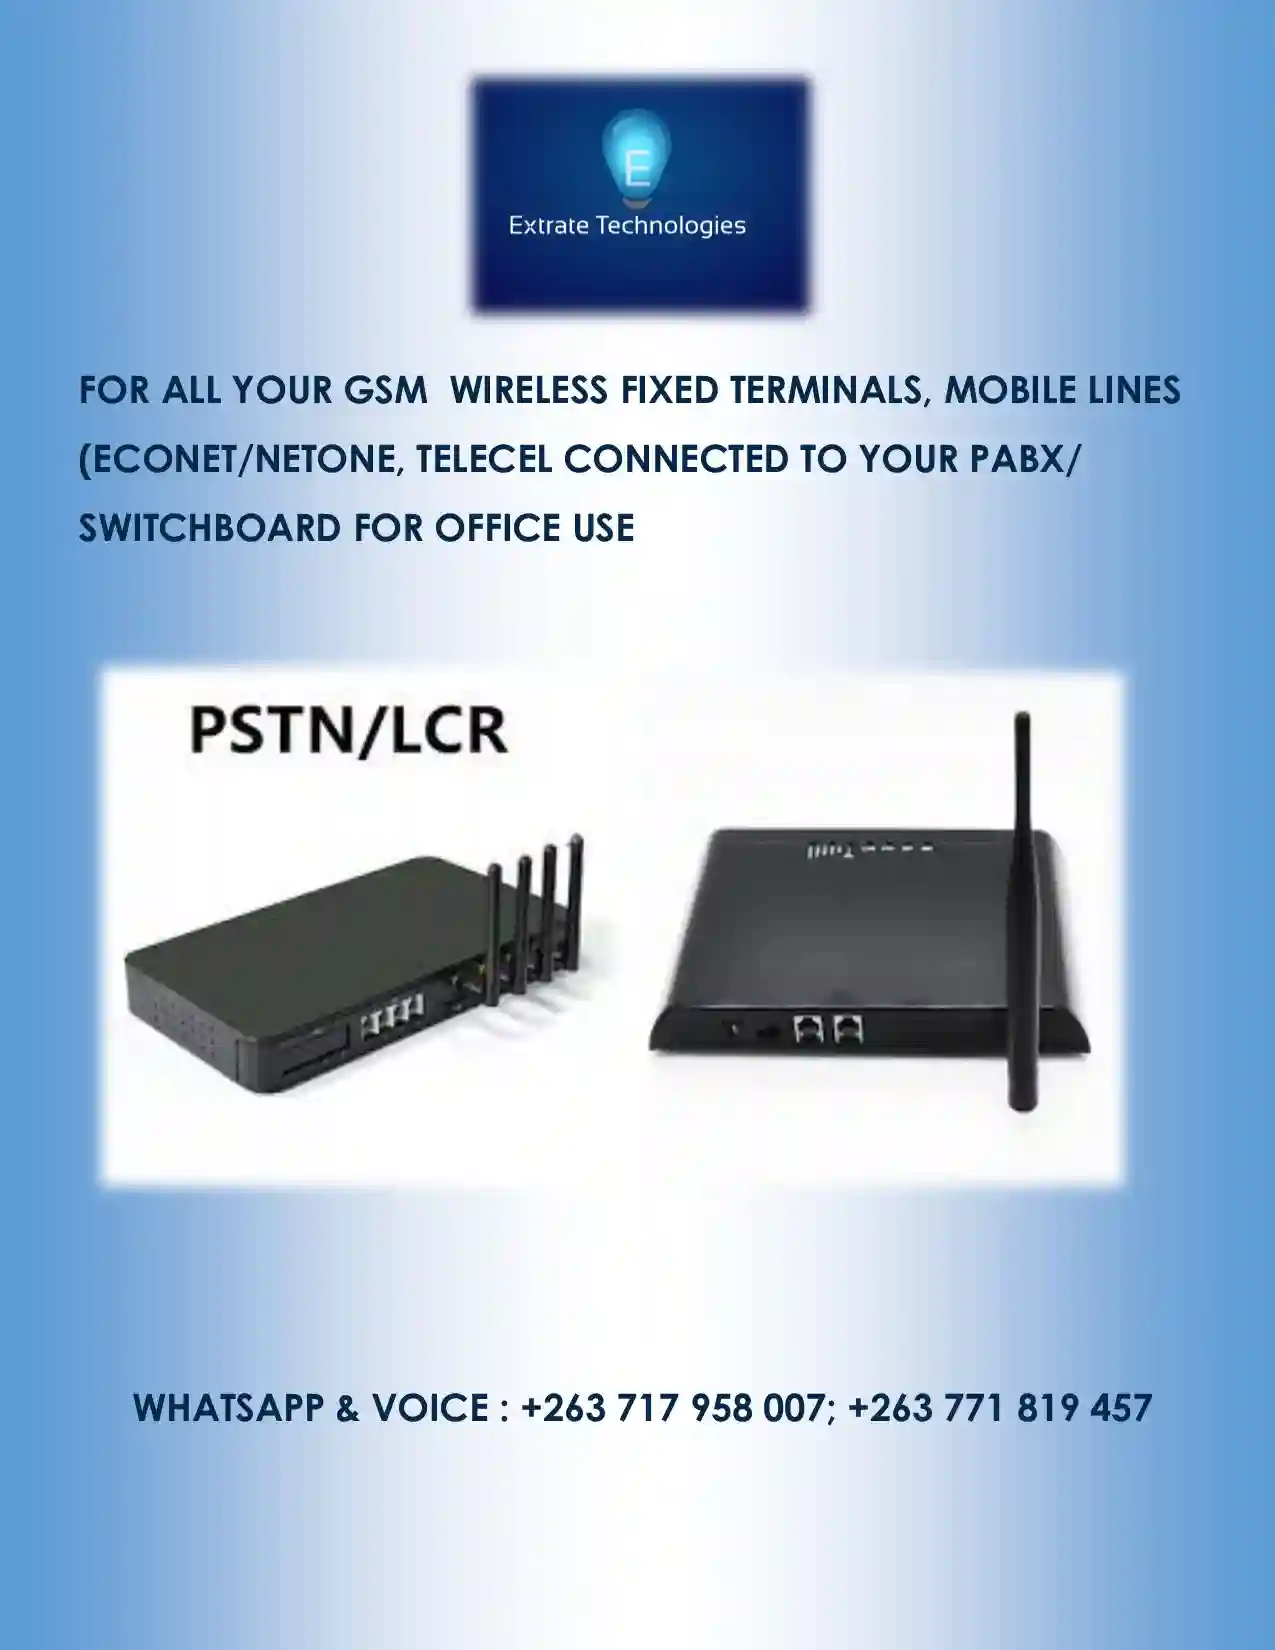 GSM Fixed Wireless Terminals